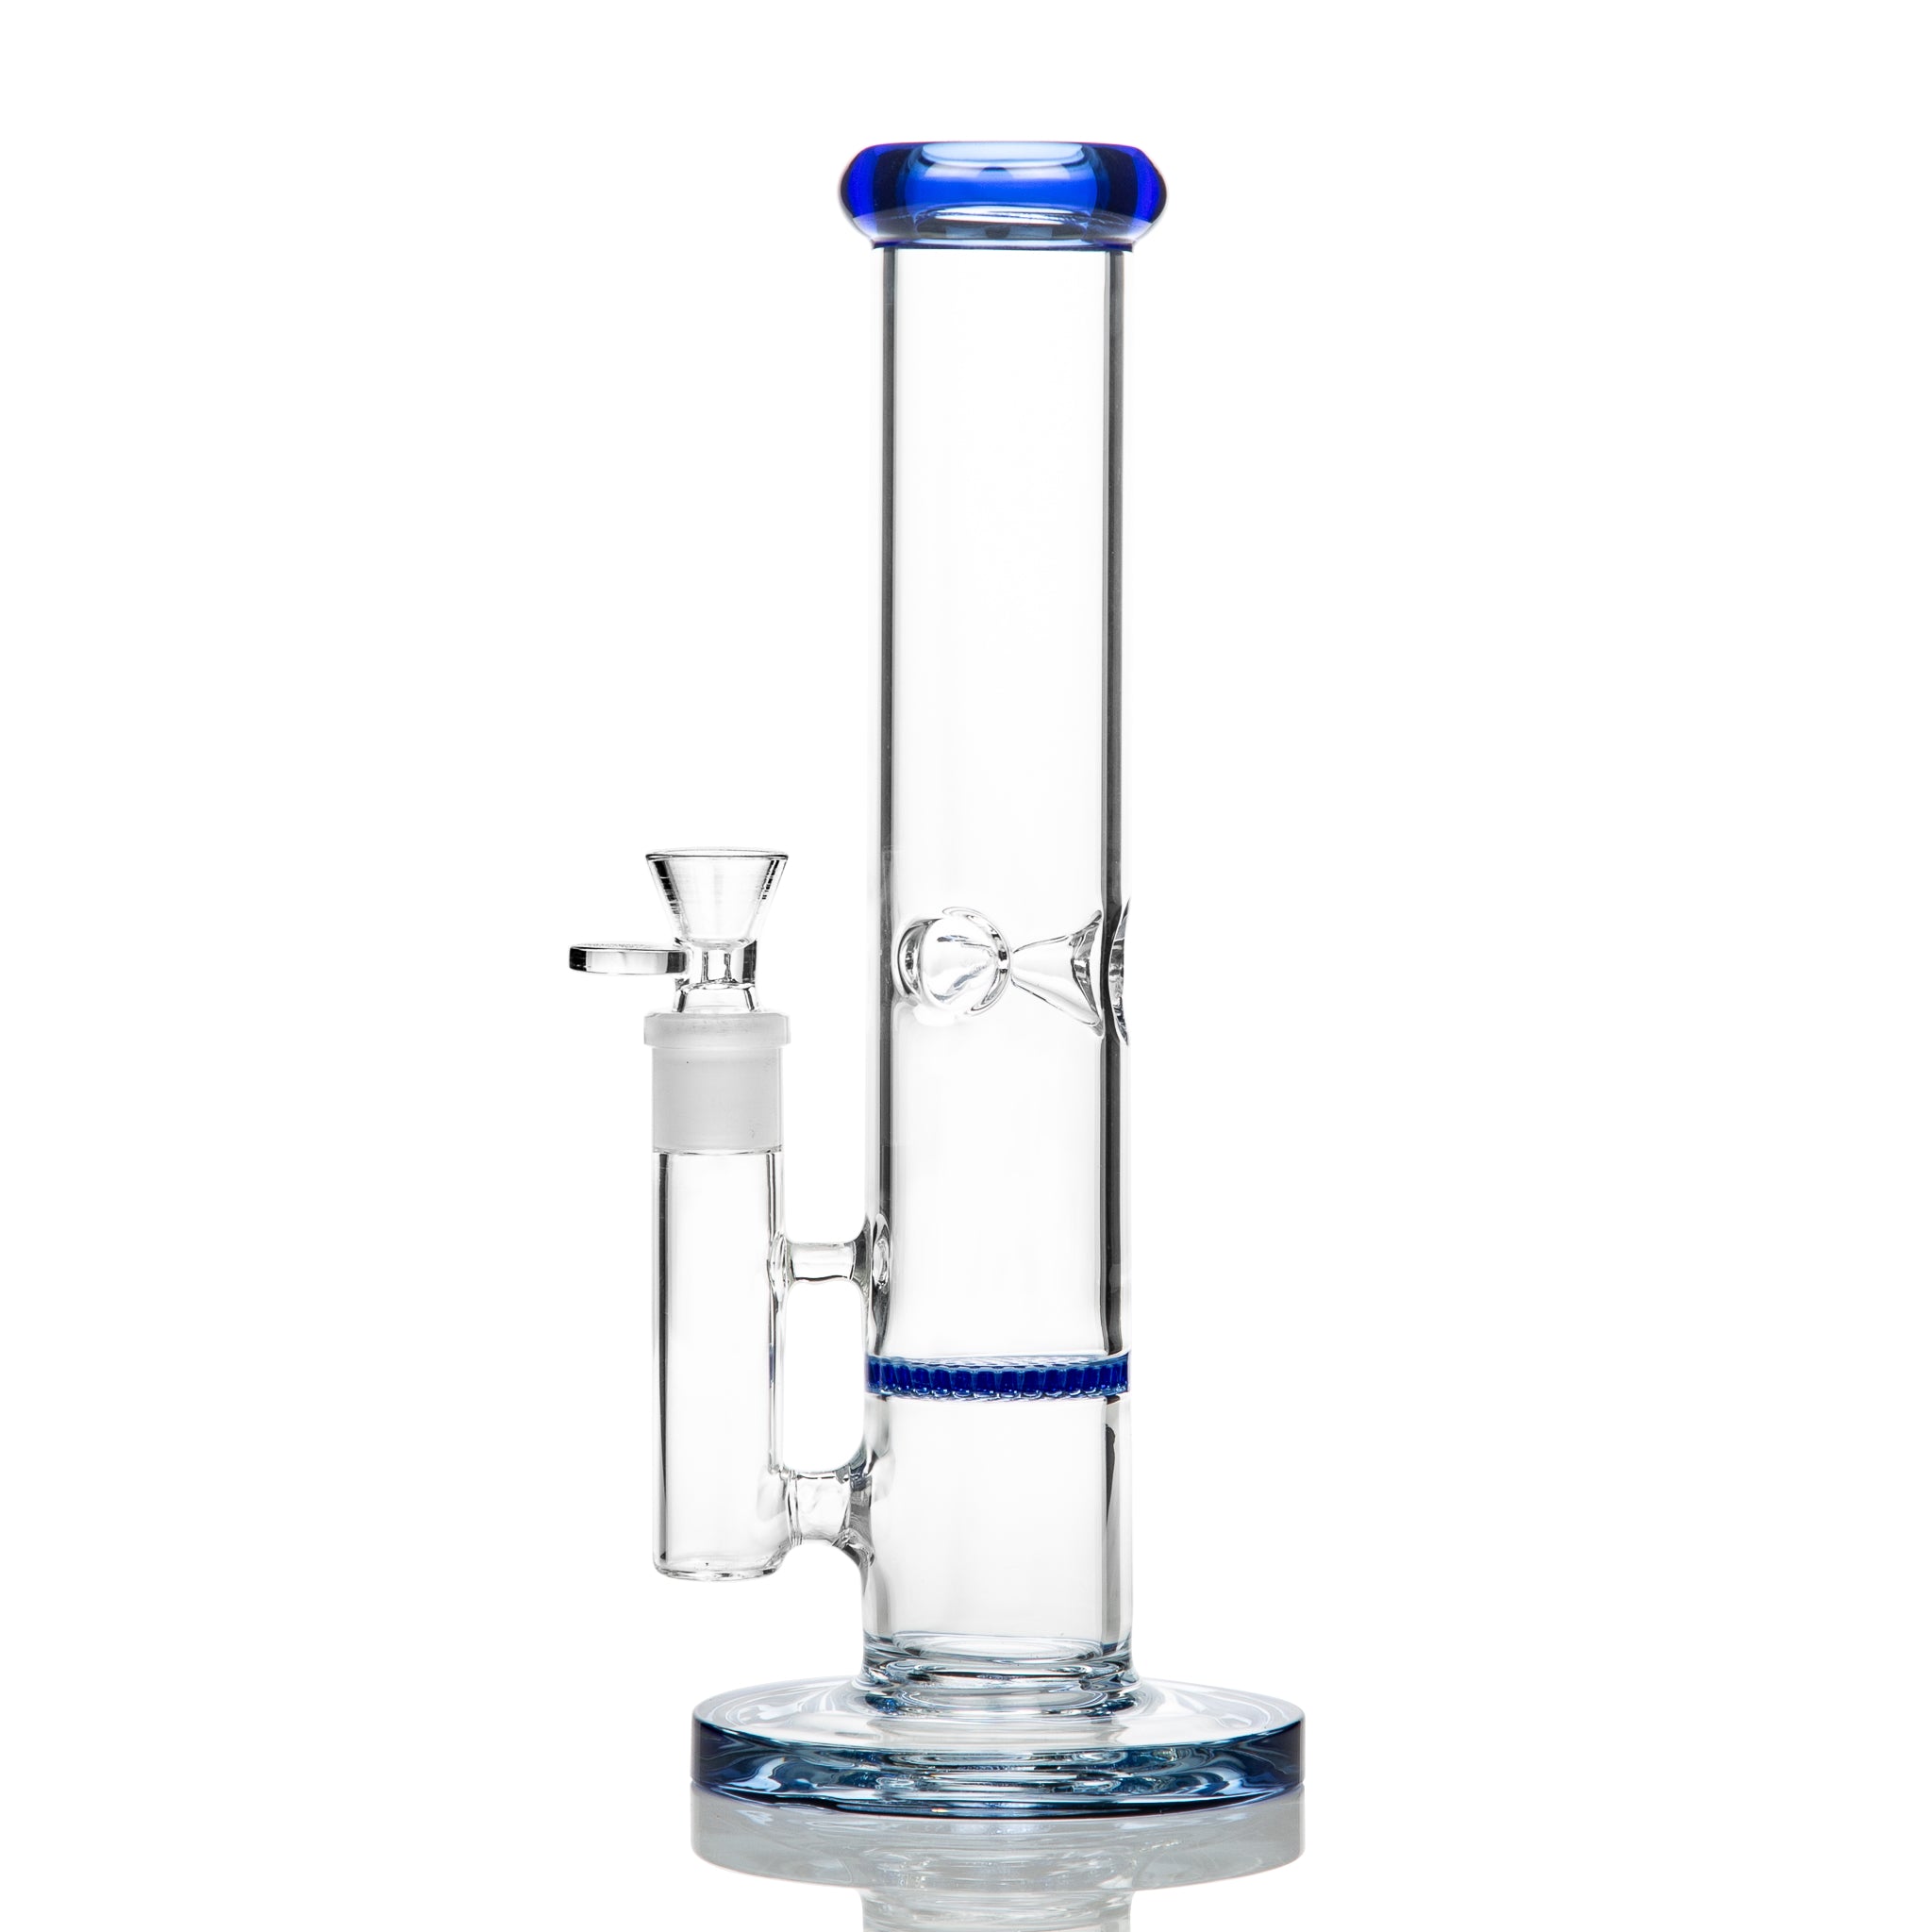 Honeycomb perc cheap glass bong with cone piece at Easy shop in Australia.